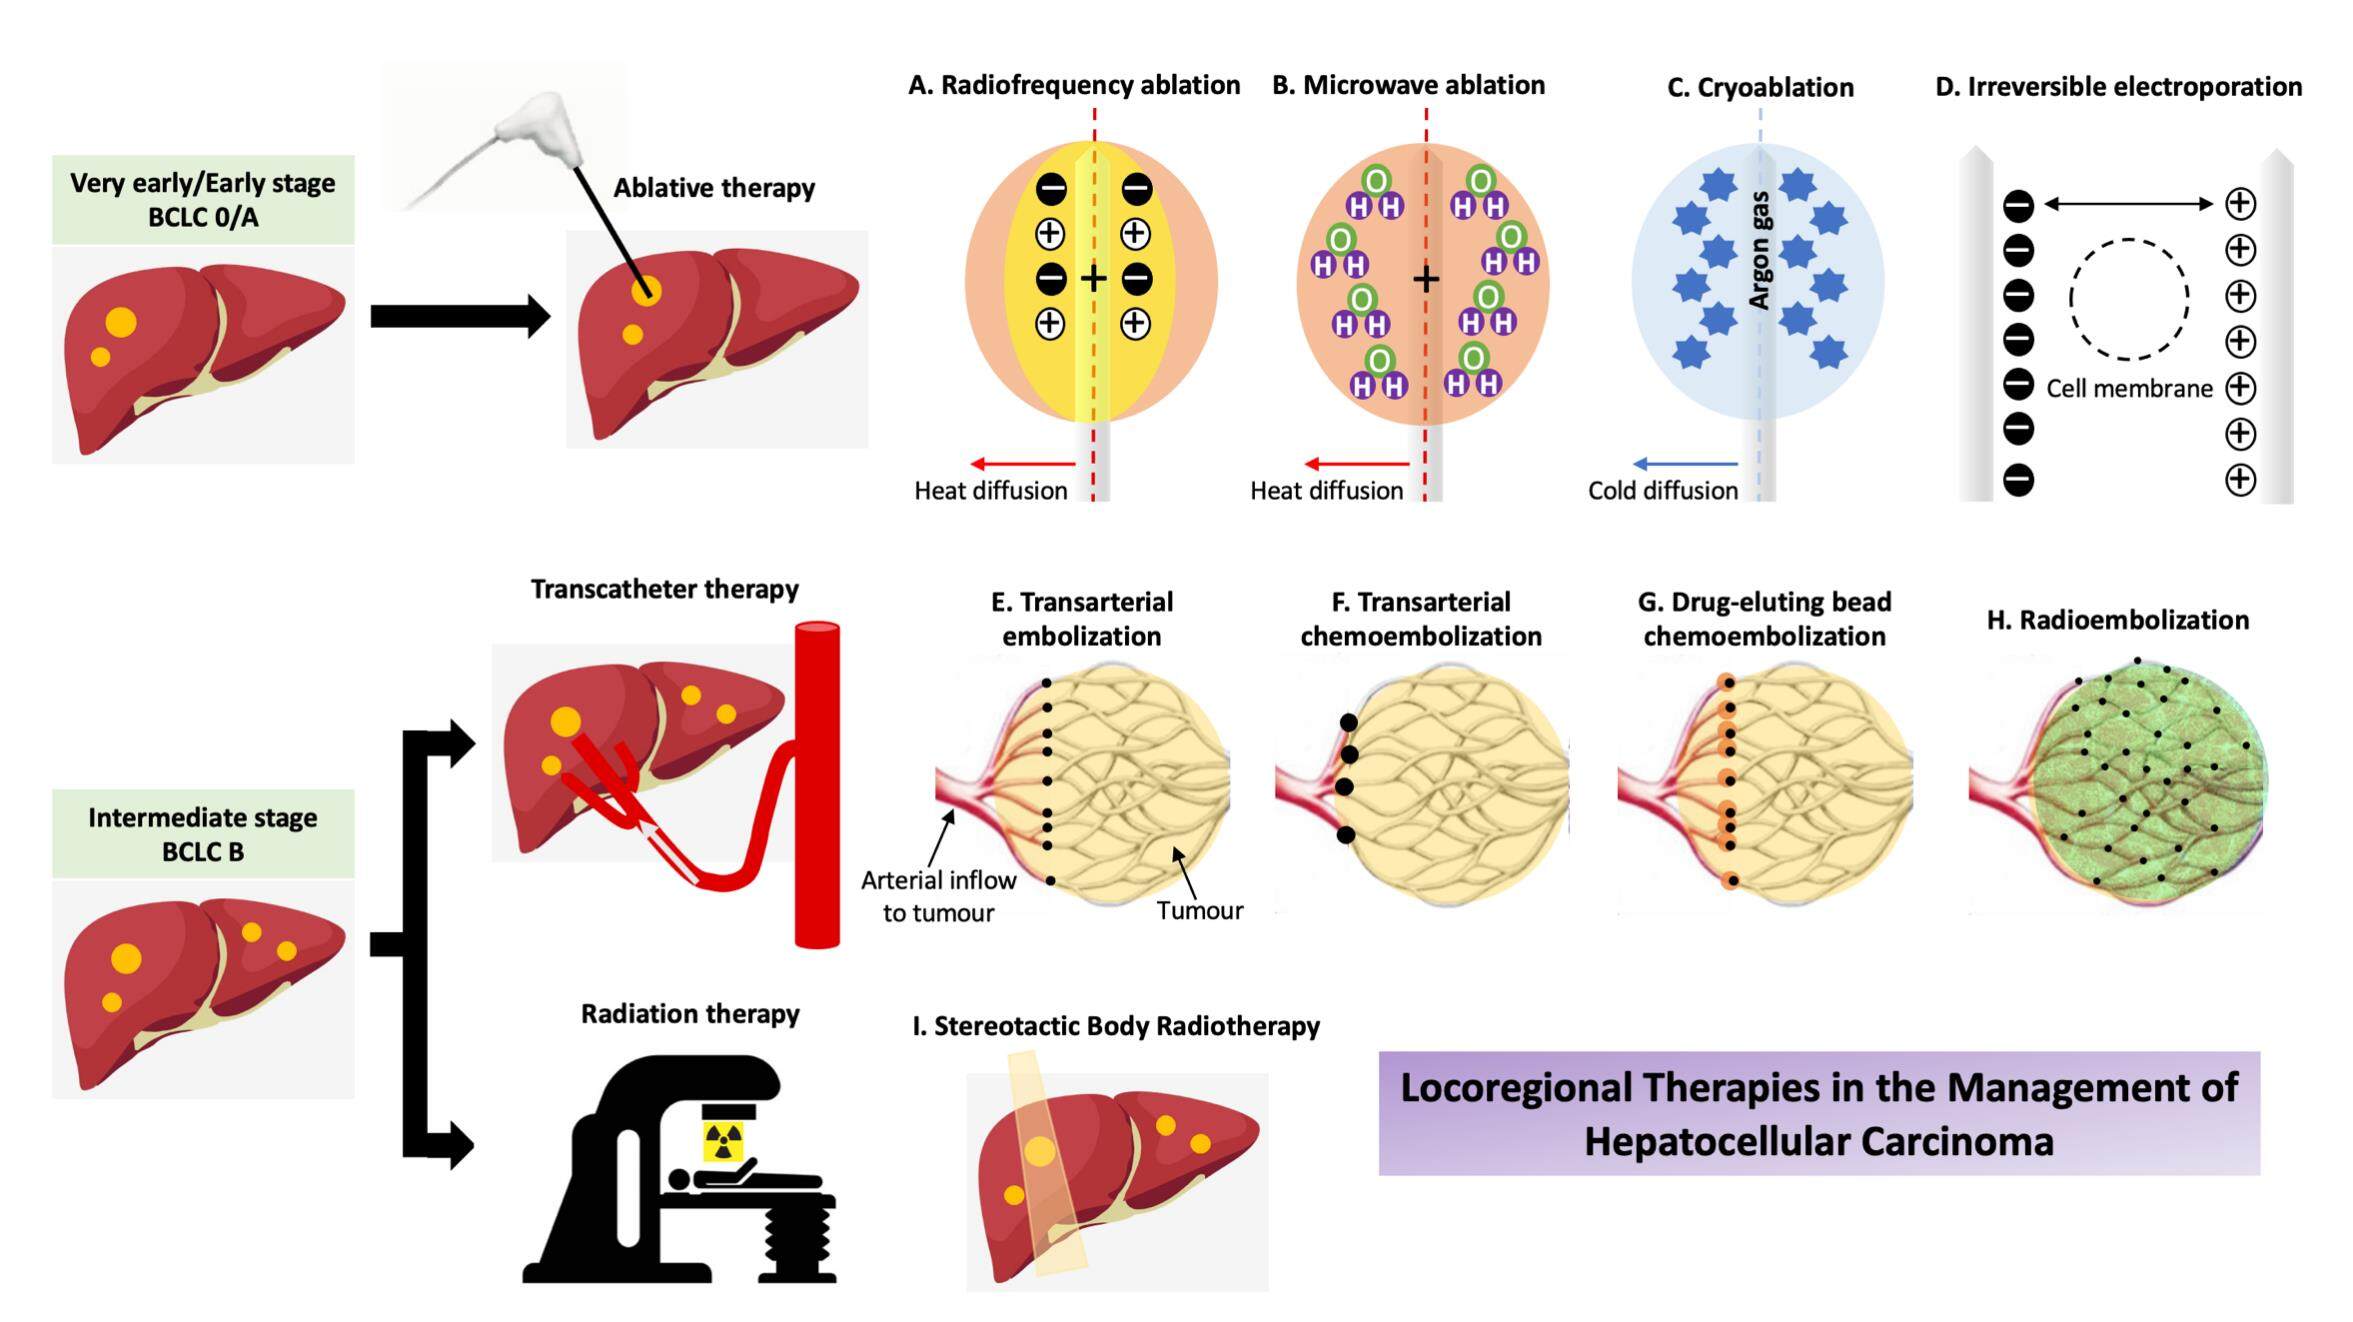 Role of locoregional therapies in the management of patients with hepatocellular carcinoma